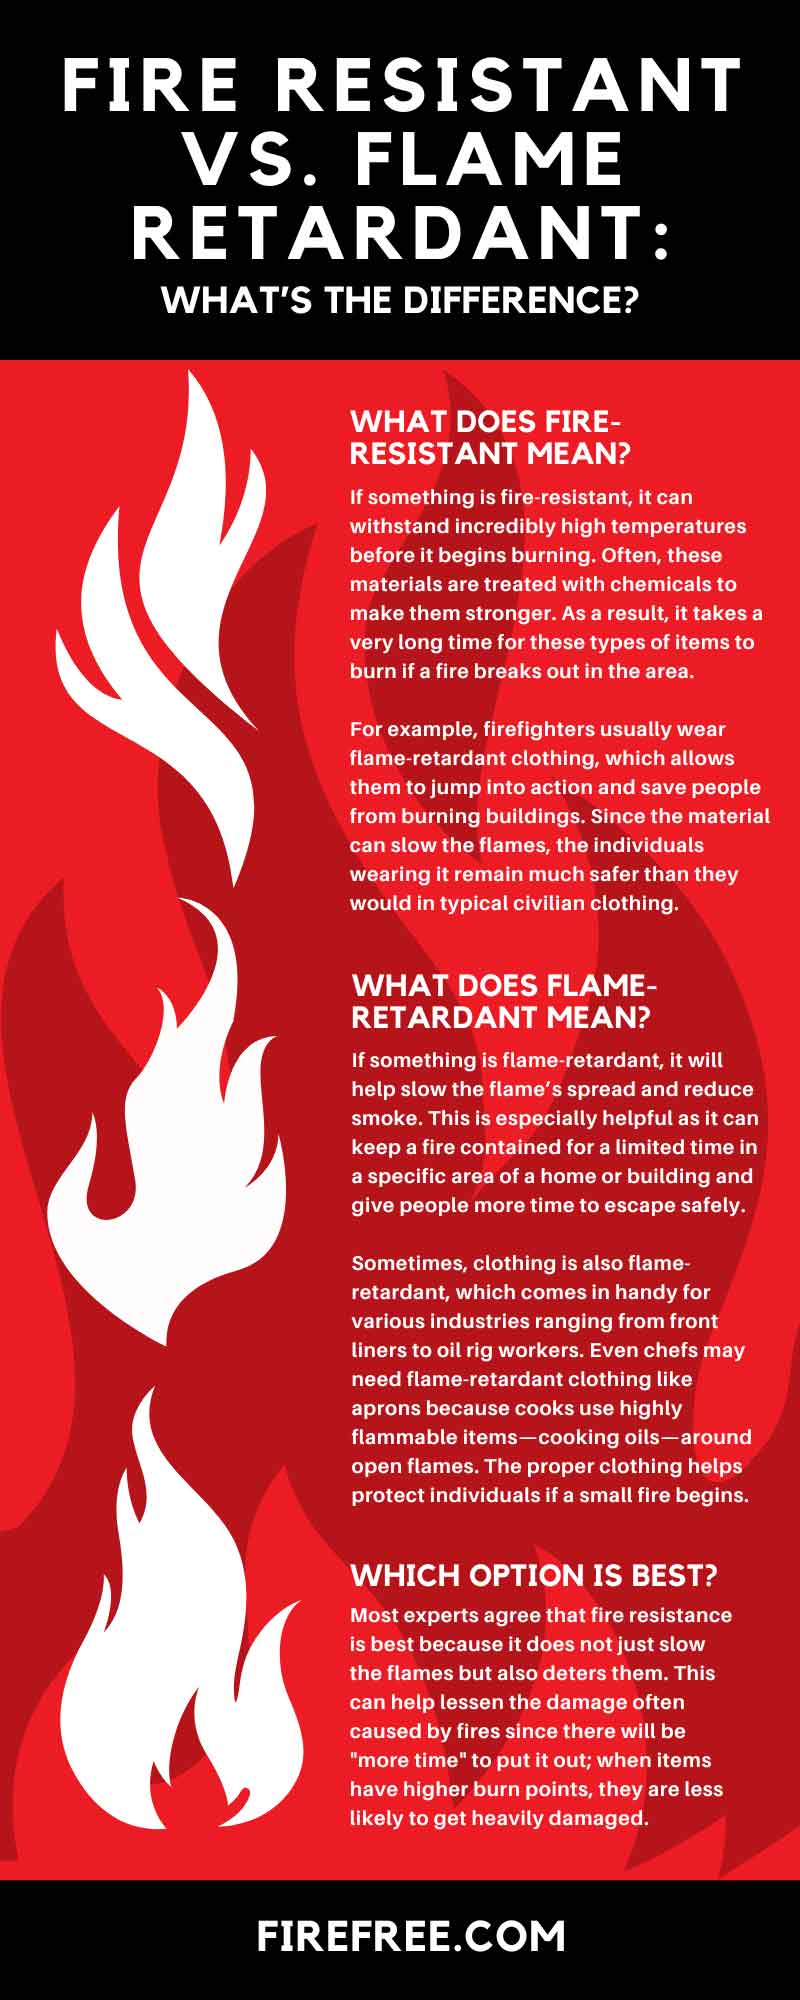 Fire Resistant vs. Flame Retardant: What's the Difference